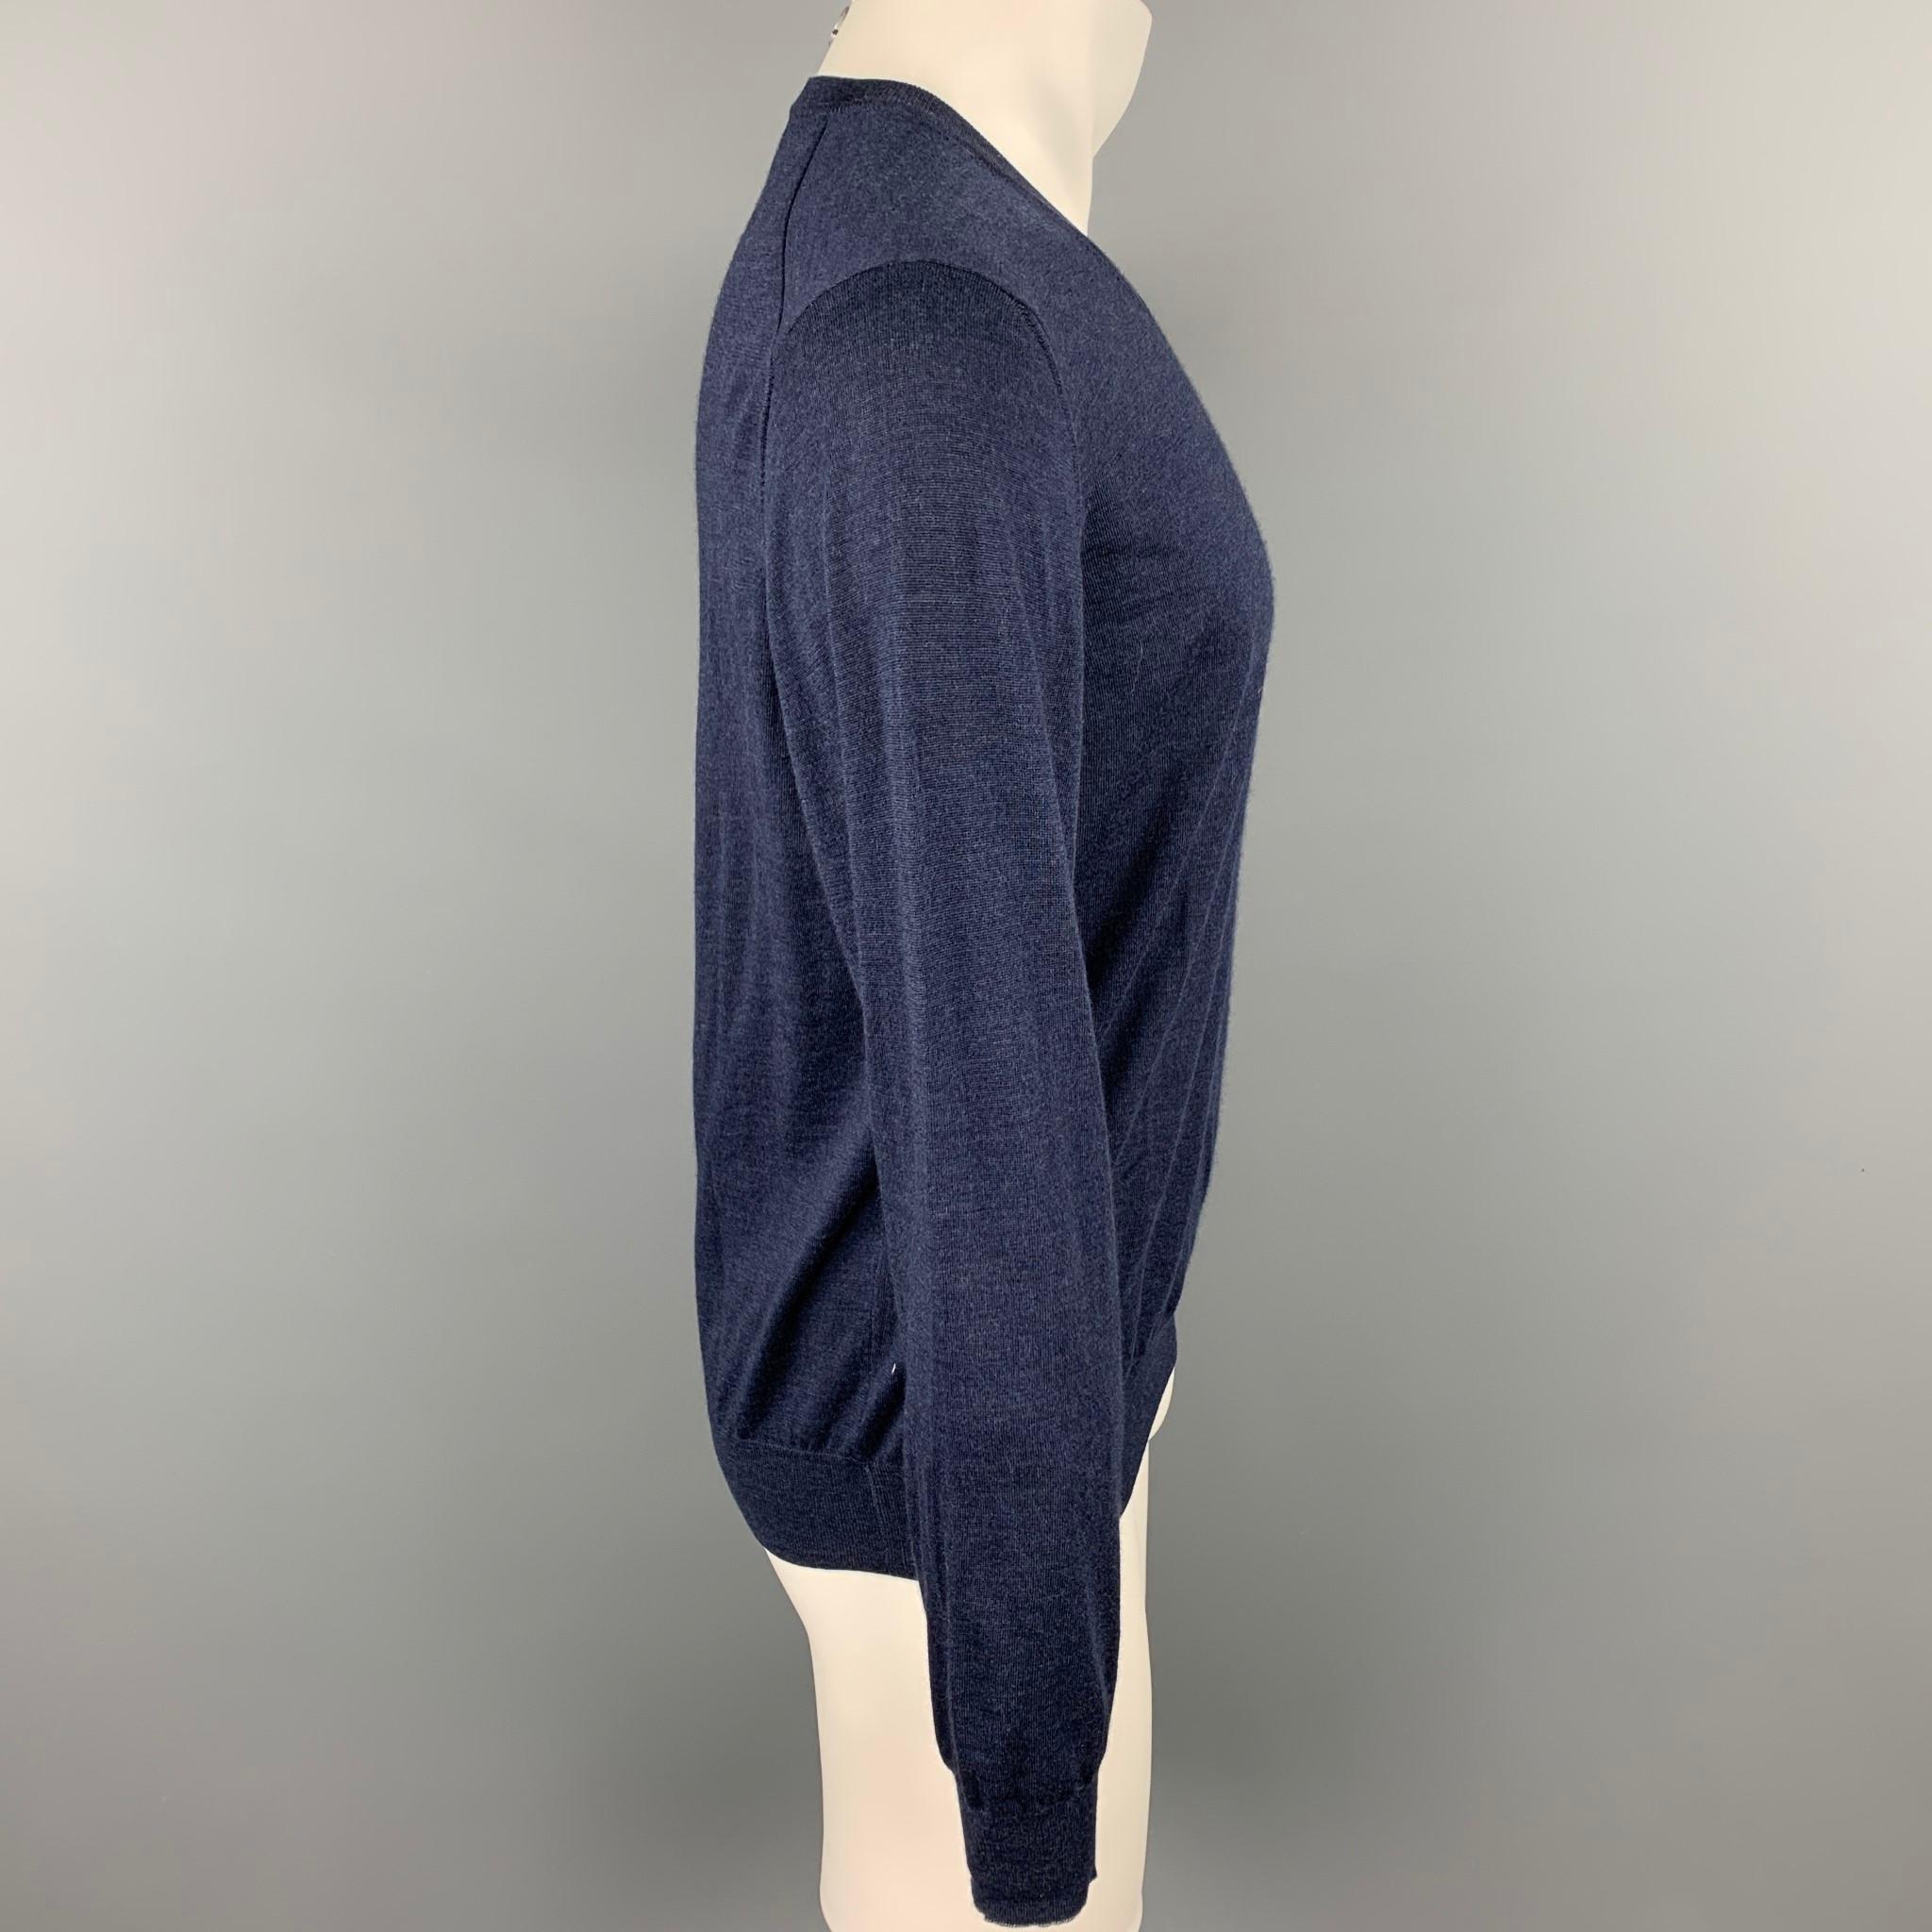 BRUNELLO CUCINELLI pullover sweater comes in a navy wool / cashmere featuring a v-neck. Made in Italy.

Very Good Pre-Owned Condition.
Marked: IT 50

Measurements:

Shoulder: 17.5 in.
Chest: 44 in.
Sleeve: 27 in.
Length: 25 in.